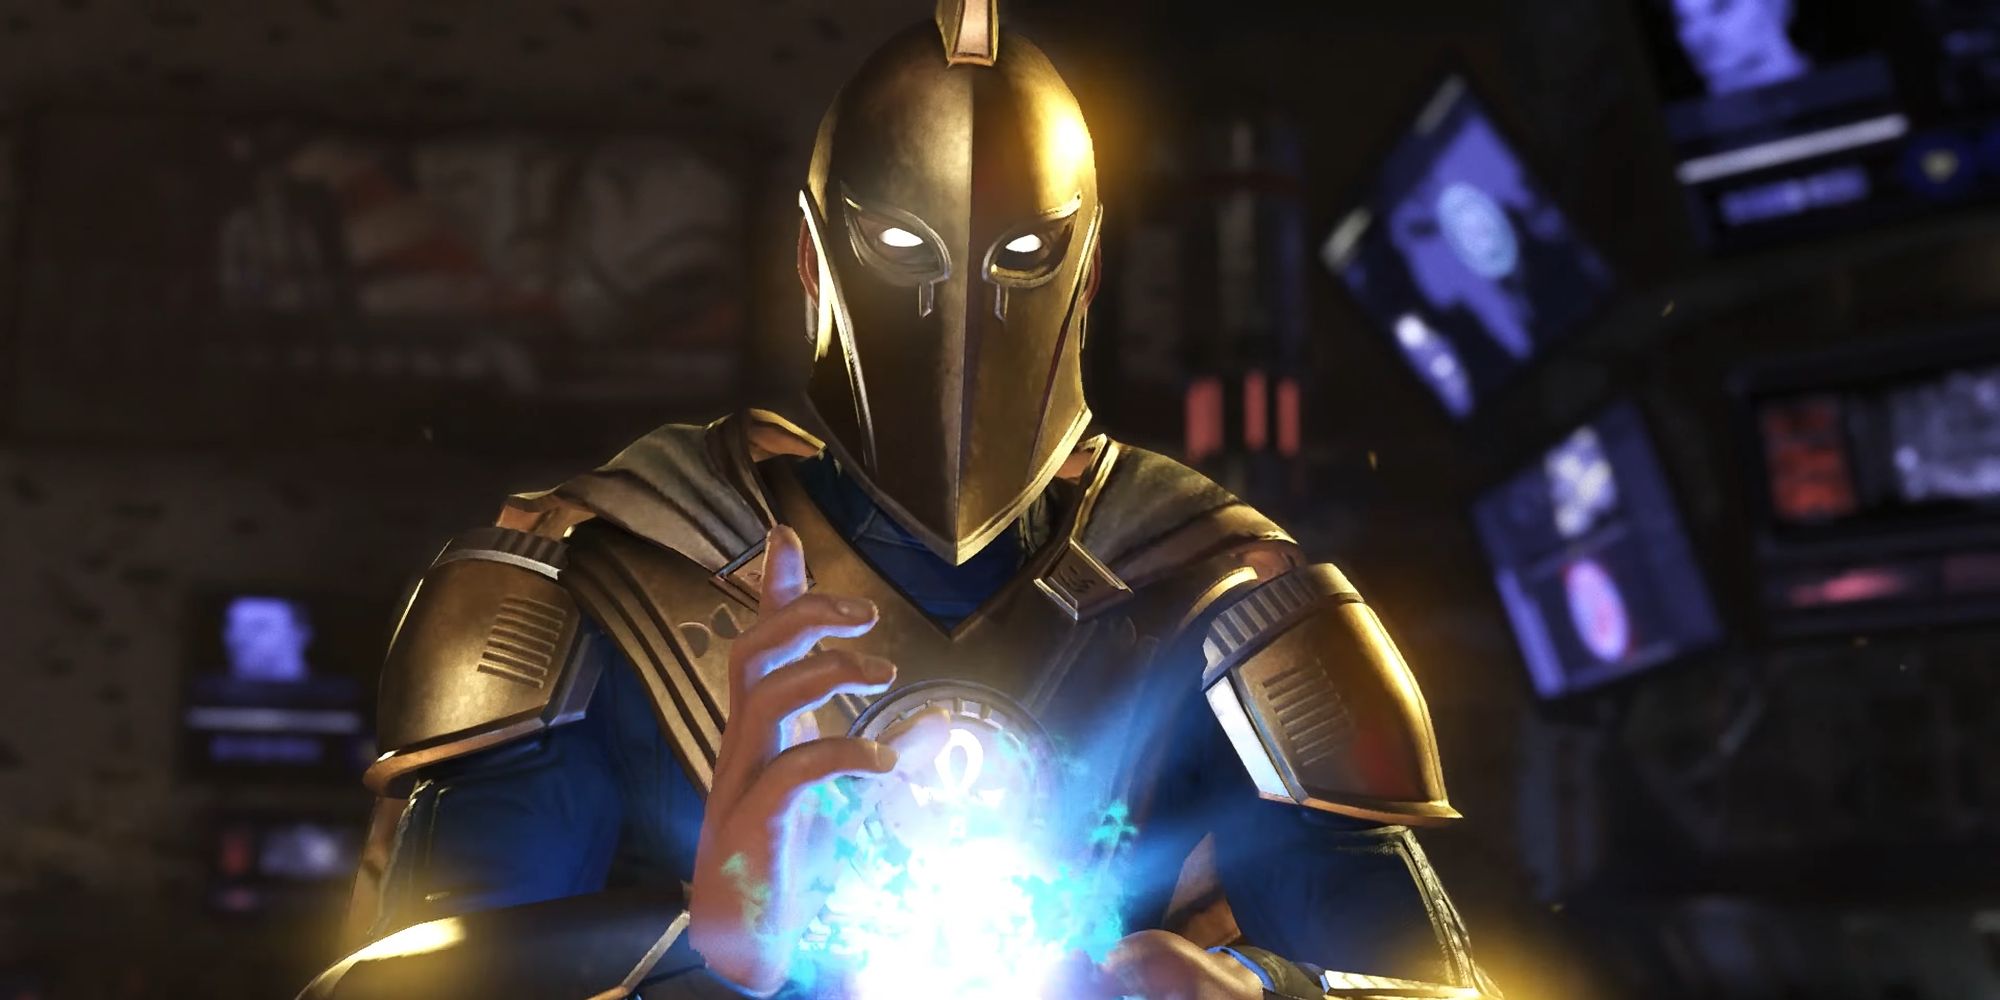 Doctor Fate casting a spell in Injustice 2